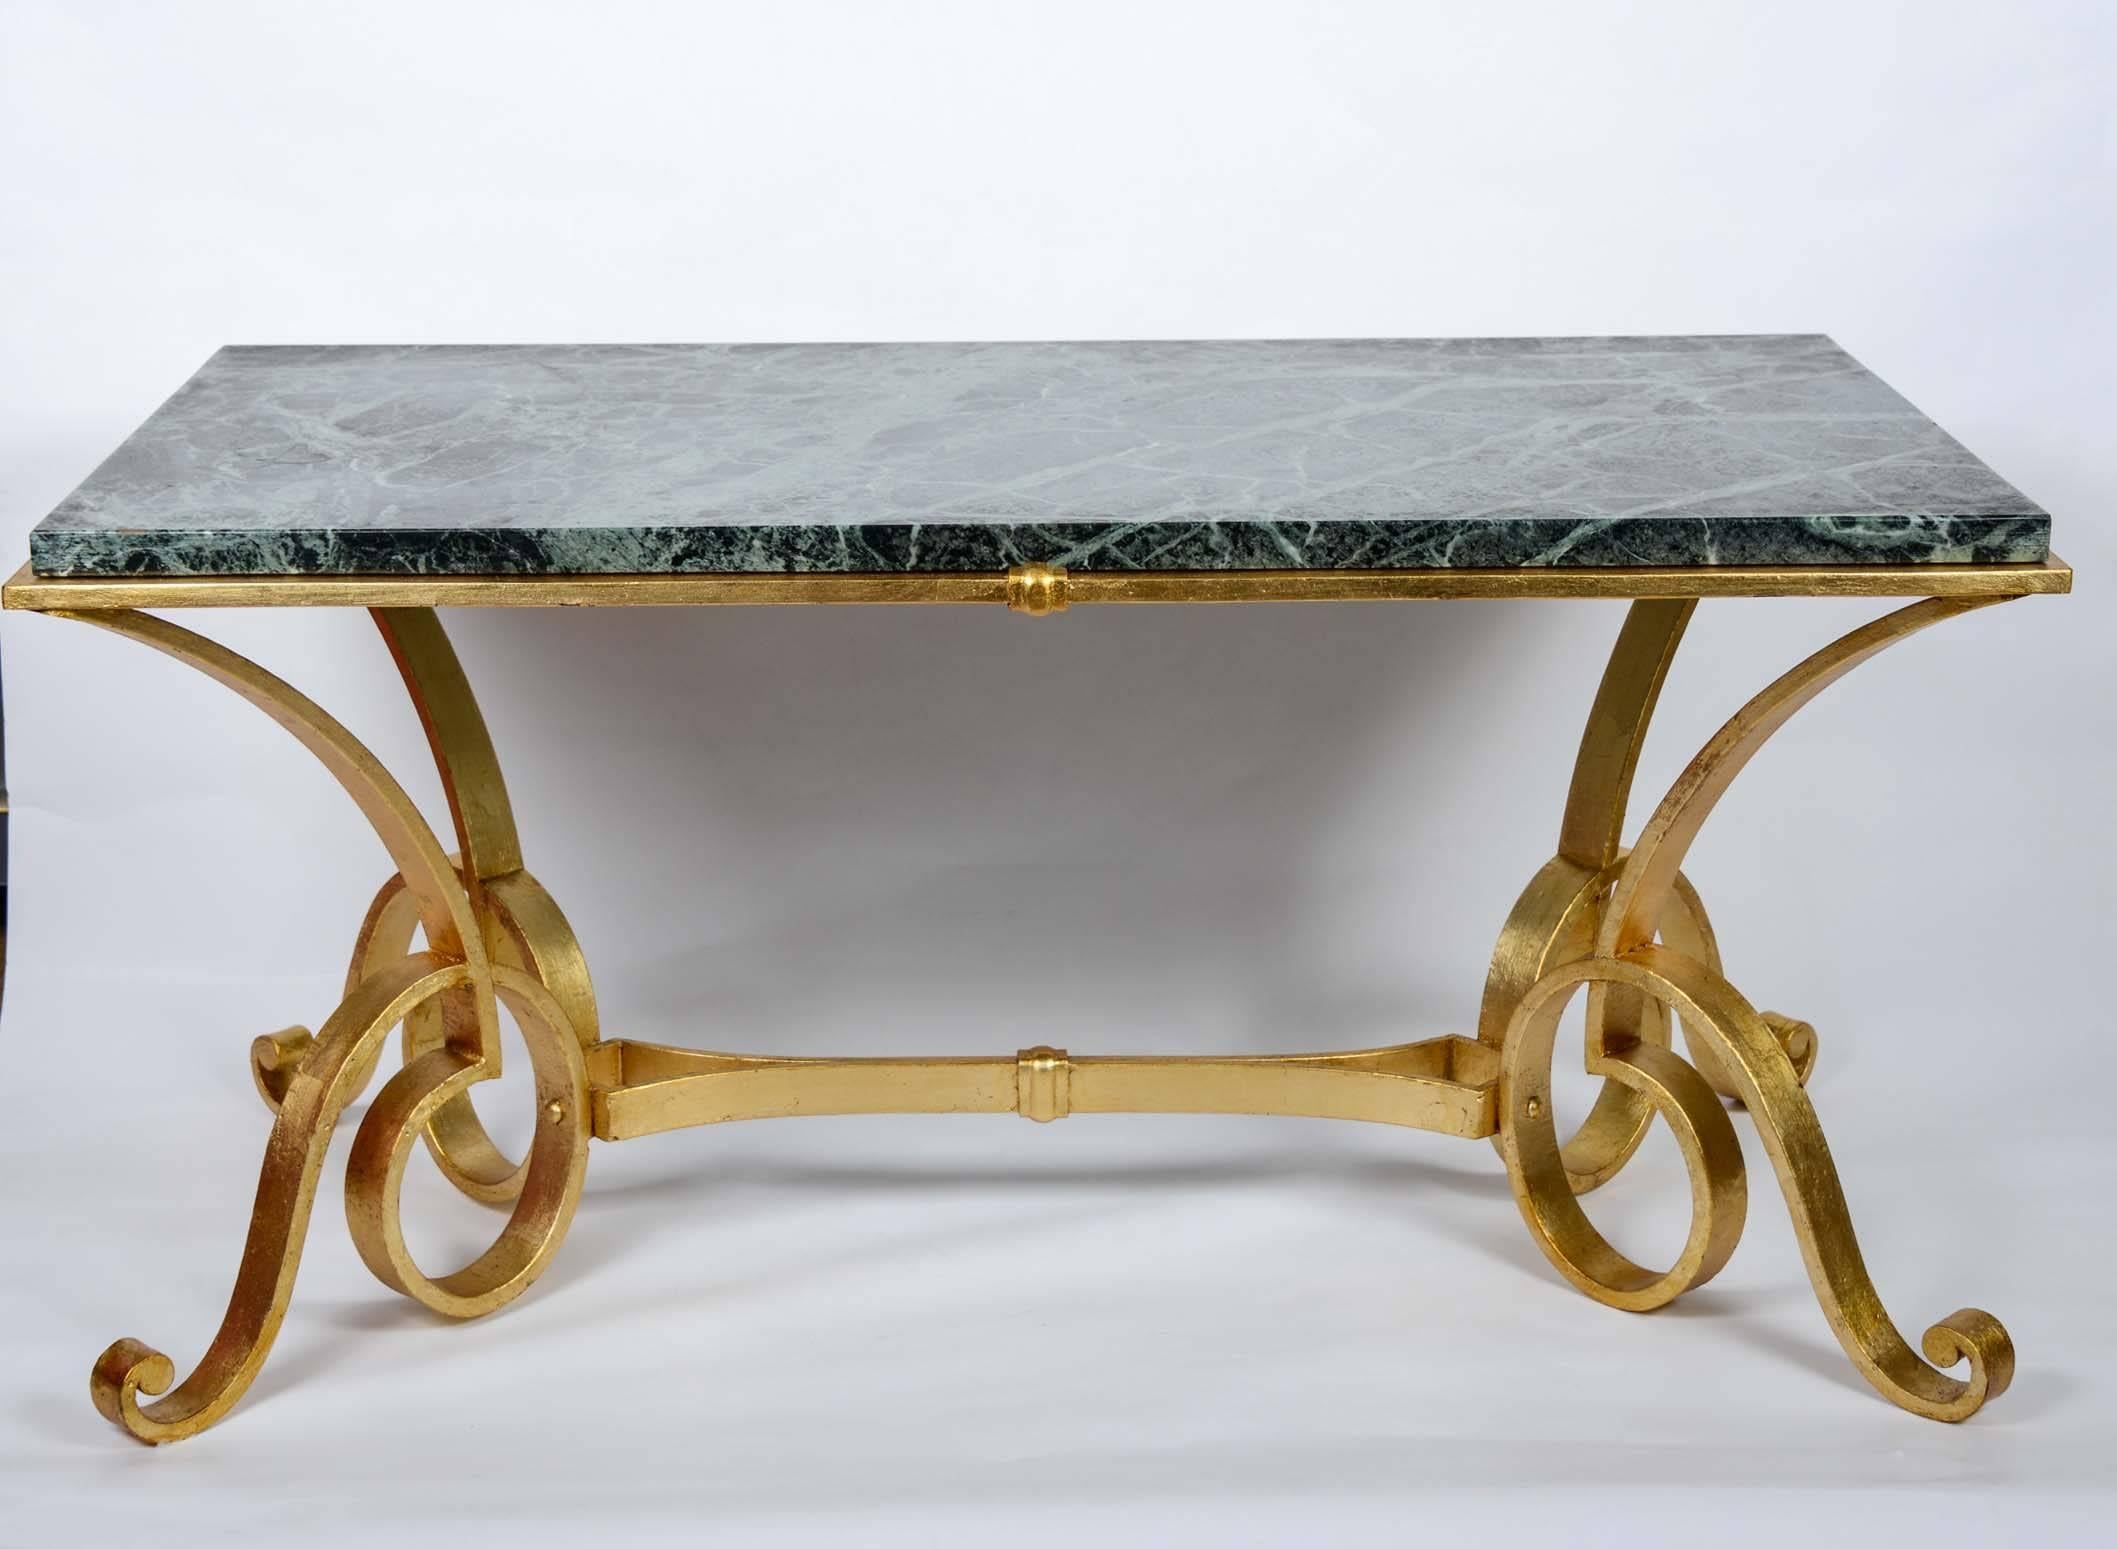 Coffee table in gold wrought iron and marble.